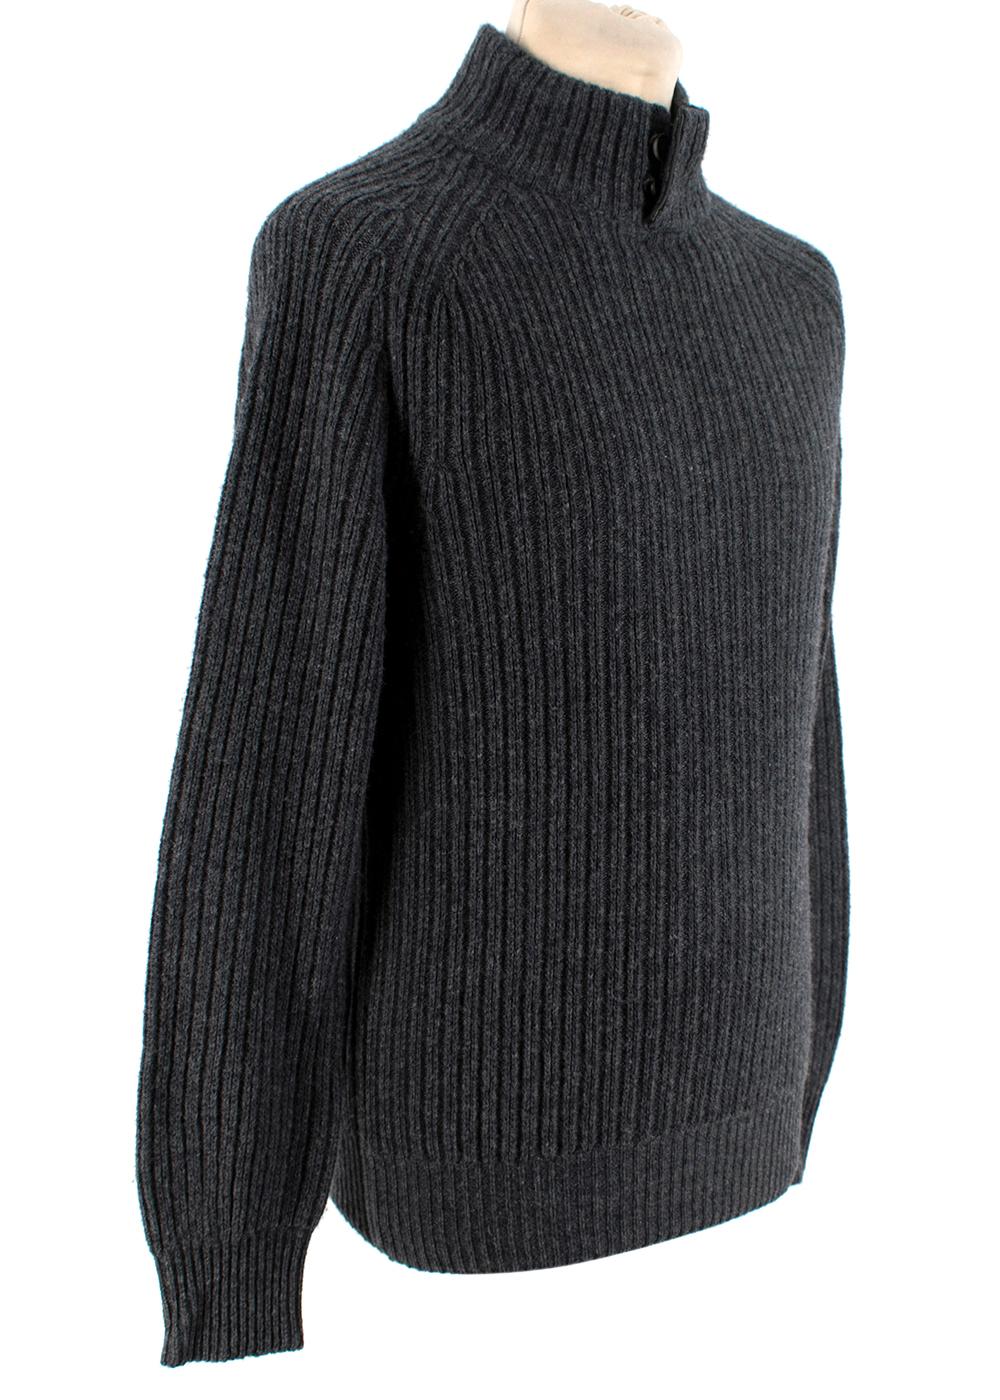 Ermenegildo Zegna Cashmere Blend Sweater 

- A Knitted grey sweater with high neckline
- Buttoned collar 
- Extremely soft touch fabric

Material:
80% Wool 
20% Cashmere 
Trims: 
100% Ovine Leather 

Professional cleaning only

PLEASE NOTE, THESE